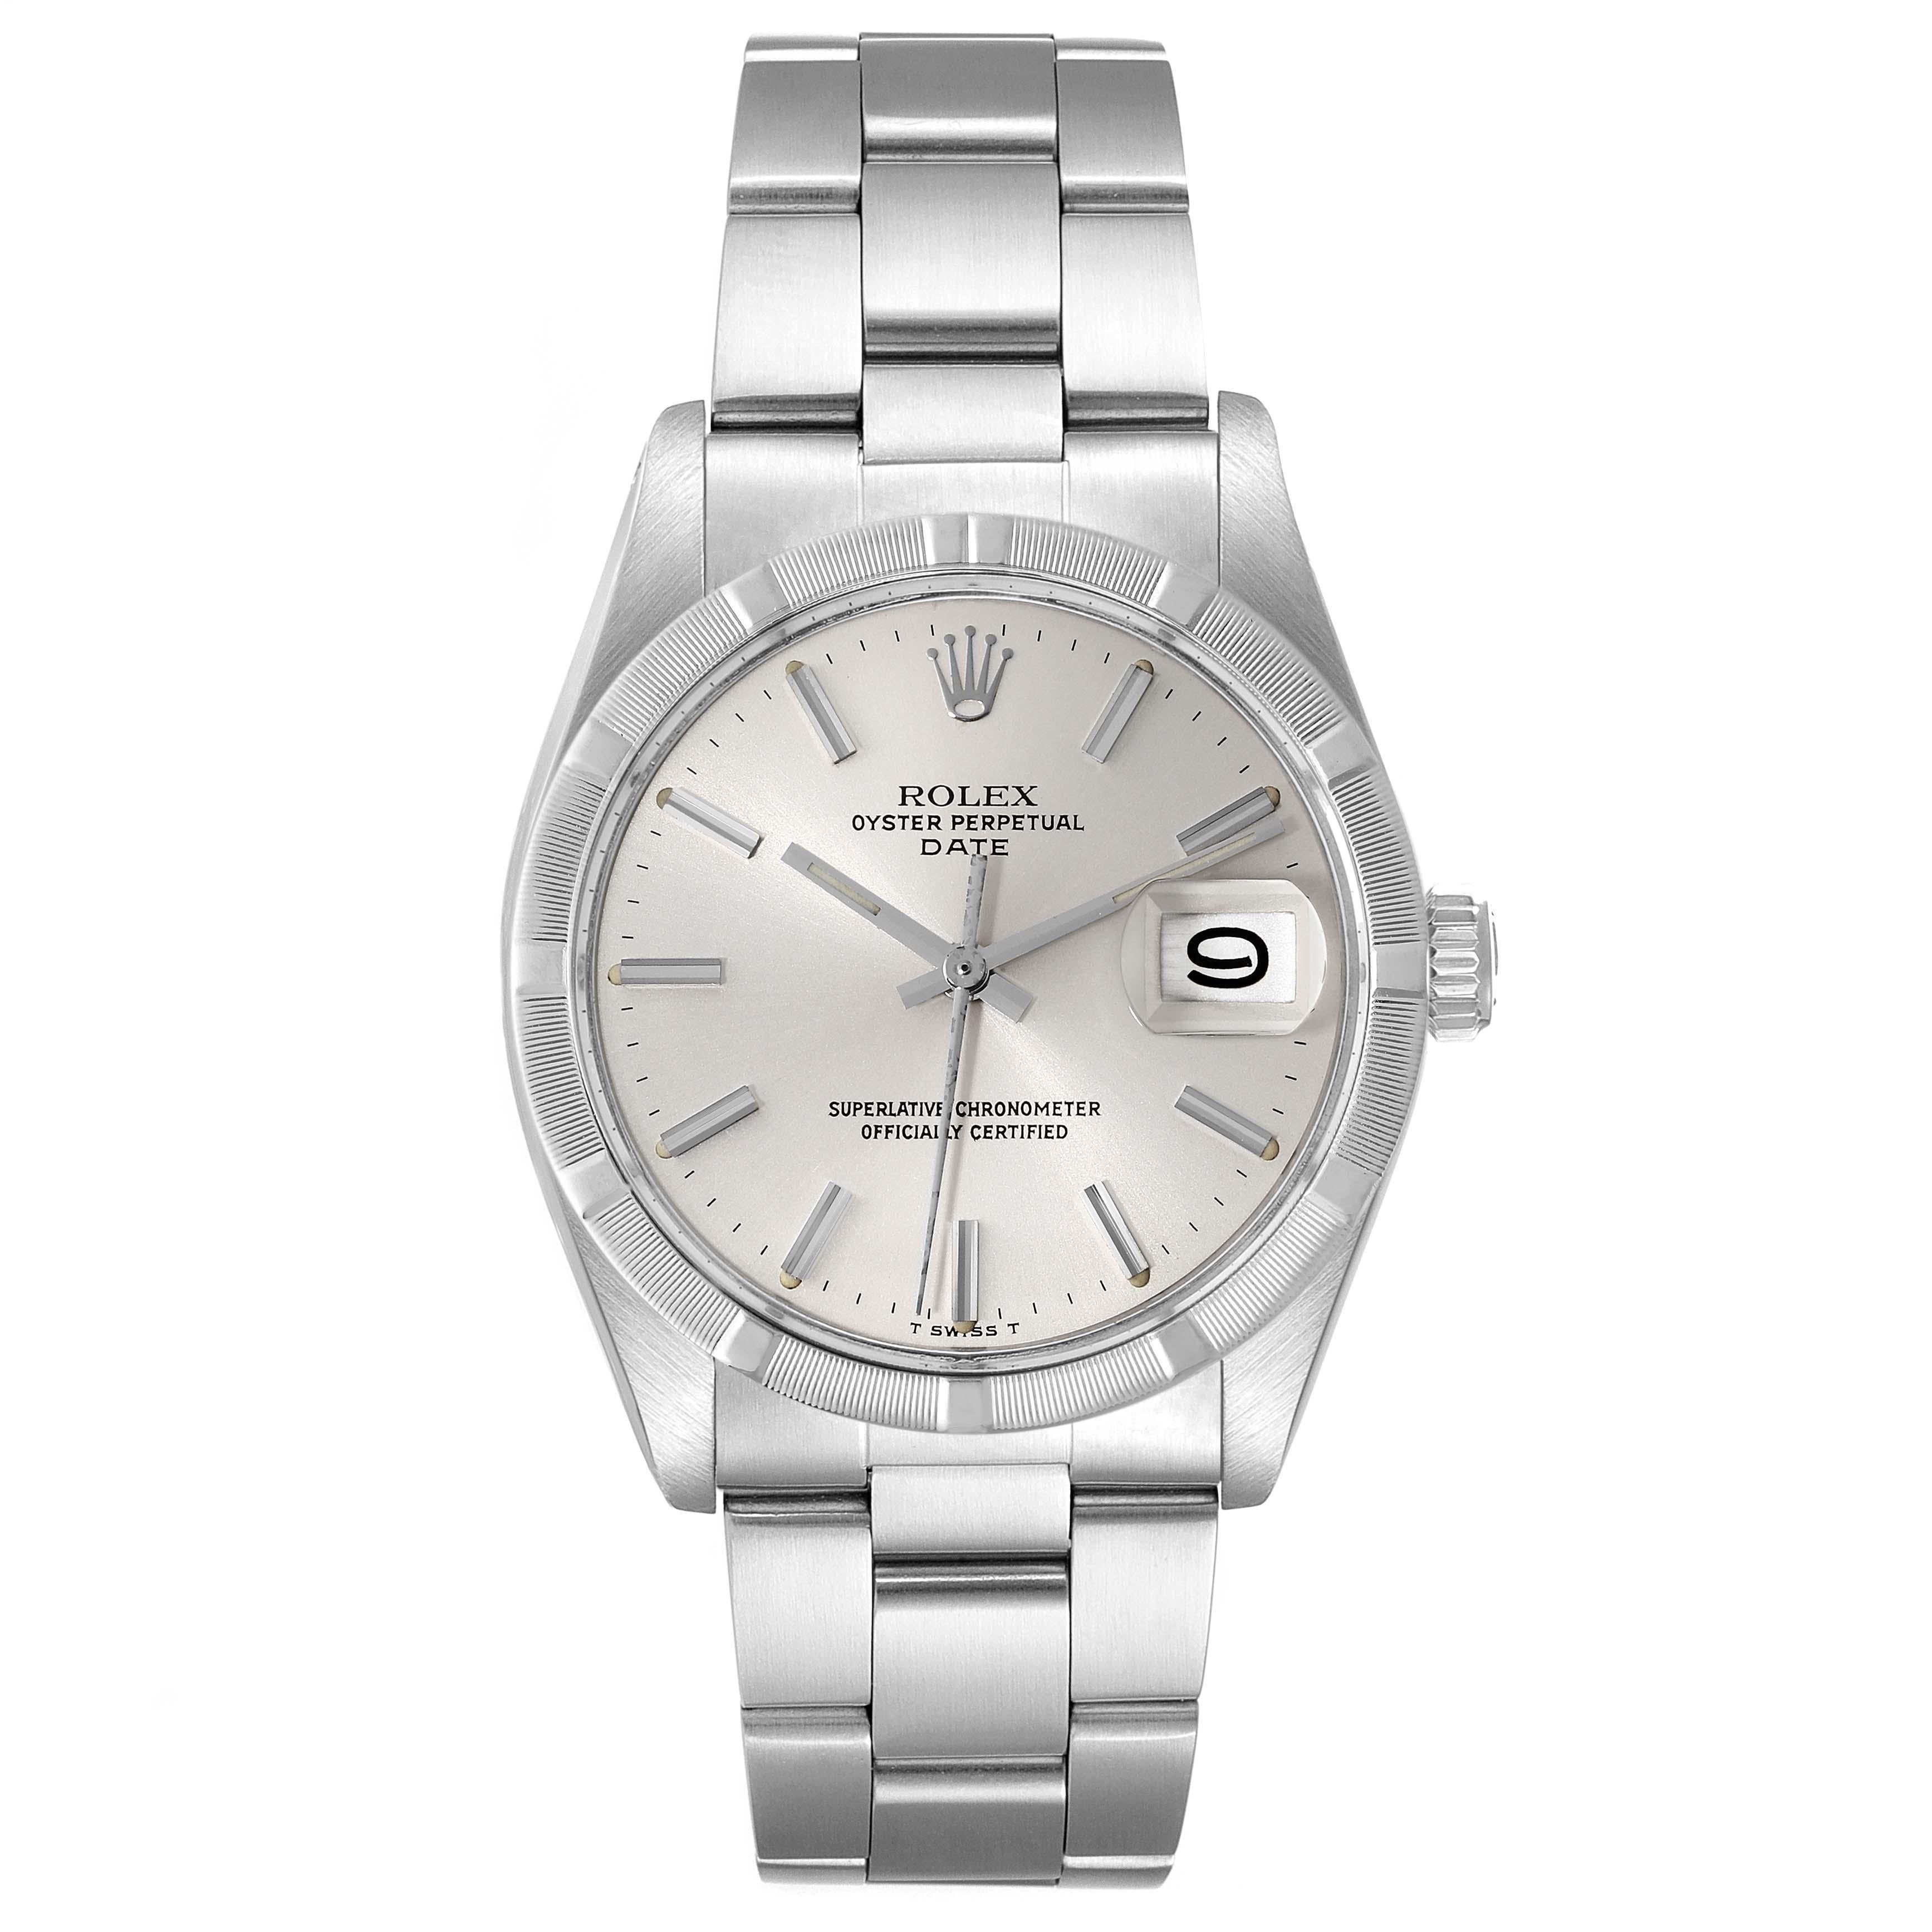 Rolex Date Silver Dial Engine Turned Bezel Vintage Steel Mens Watch 1501. Officially certified chronometer automatic self-winding movement. Stainless steel oyster case 35.0 mm in diameter. Rolex logo on the crown. Stainless steel engine turned